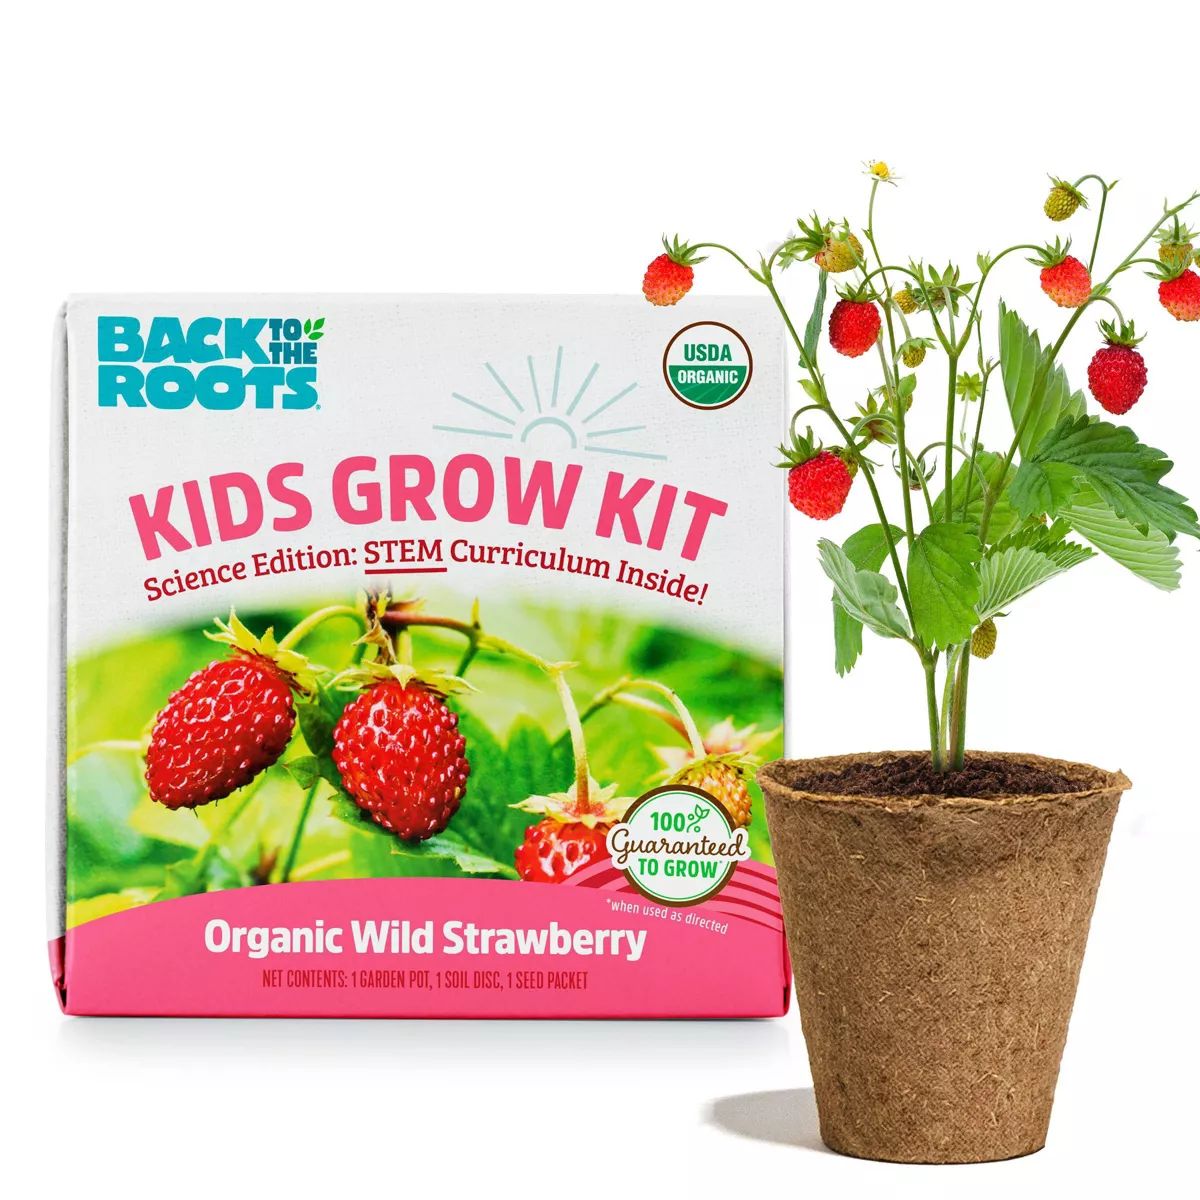 Back to the Roots Organic Alpine Strawberry Kids Grow Kit Science Edition | Target